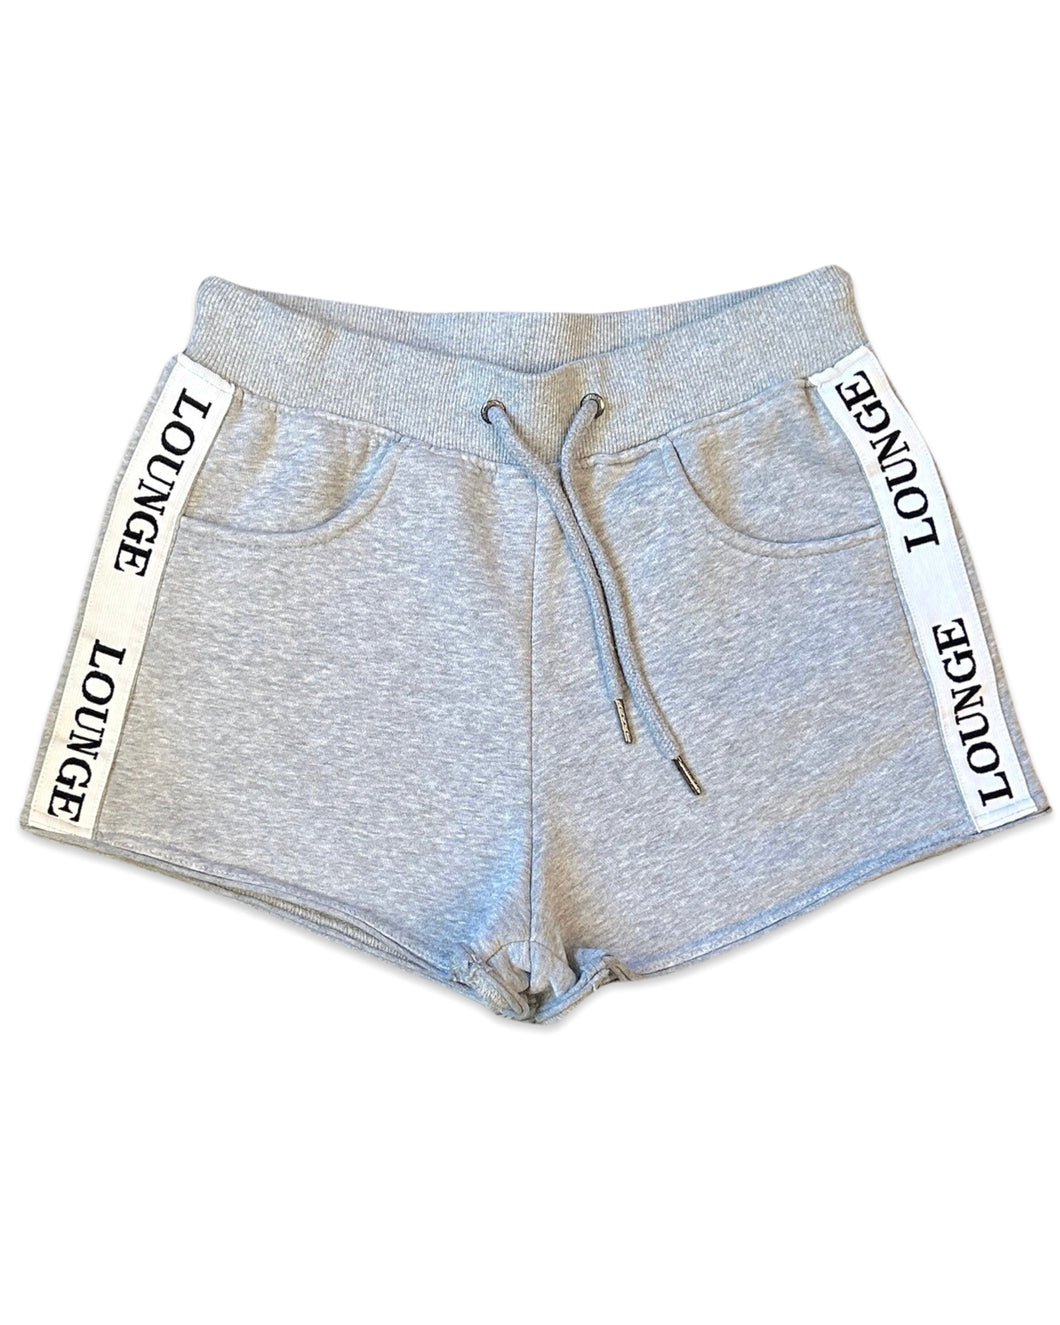 Lounge Australia High Waisted Tape Sweat Shorts in Grey ⏐ Size S